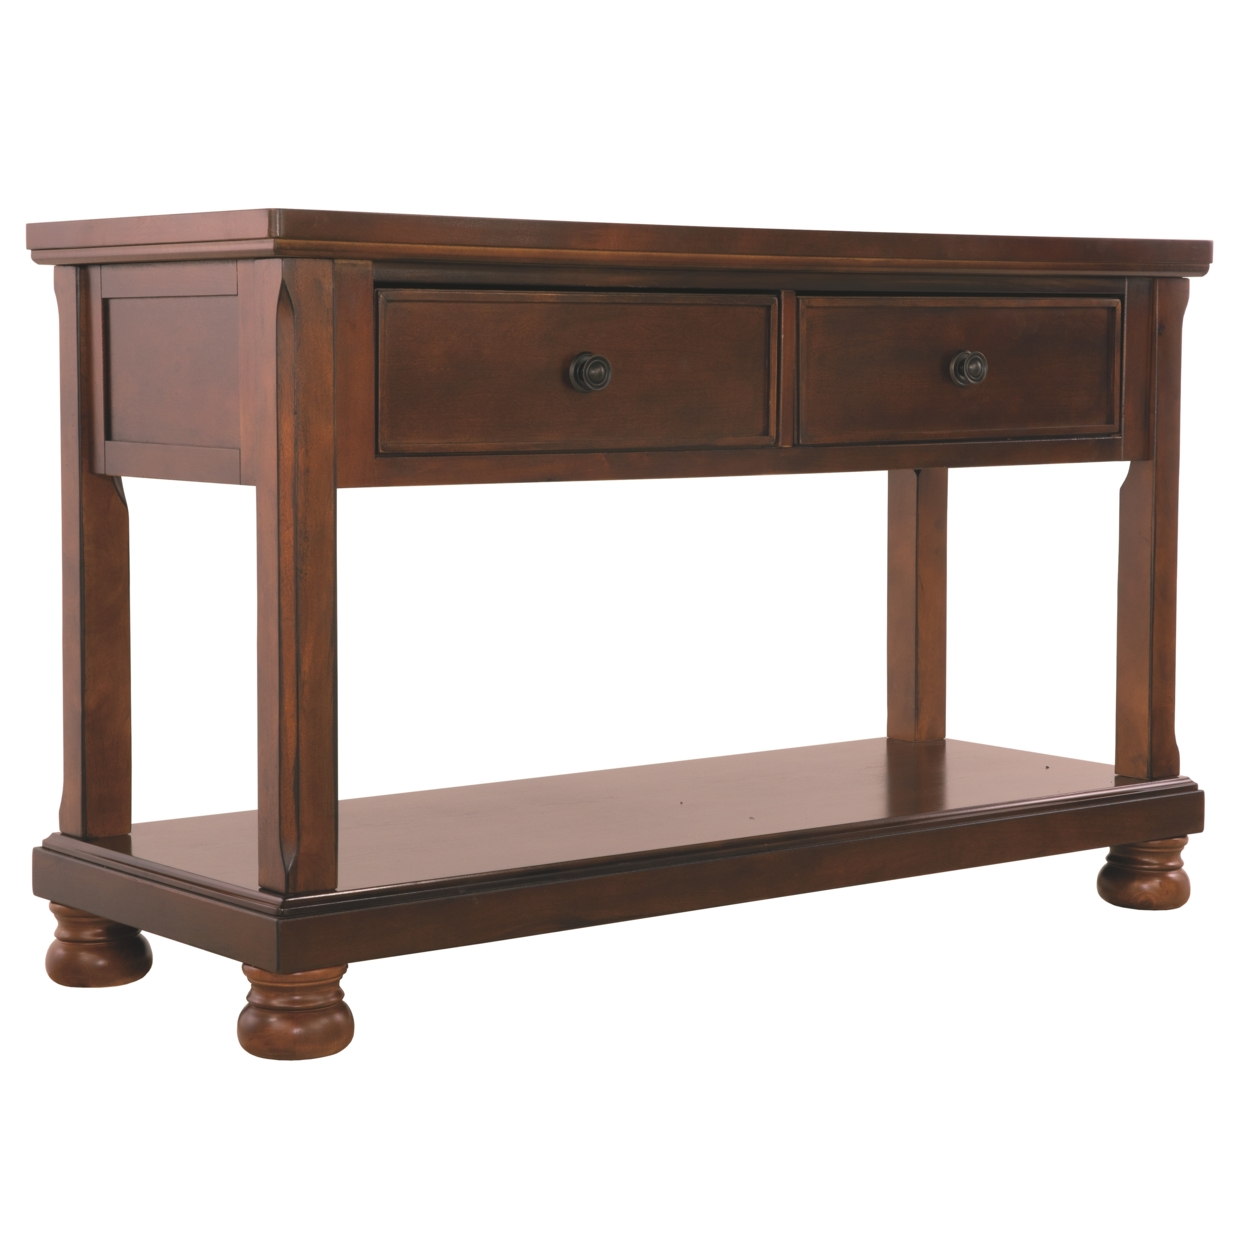 Wooden Console Table With Bun Feet And Storage Space, Brown- Saltoro Sherpi